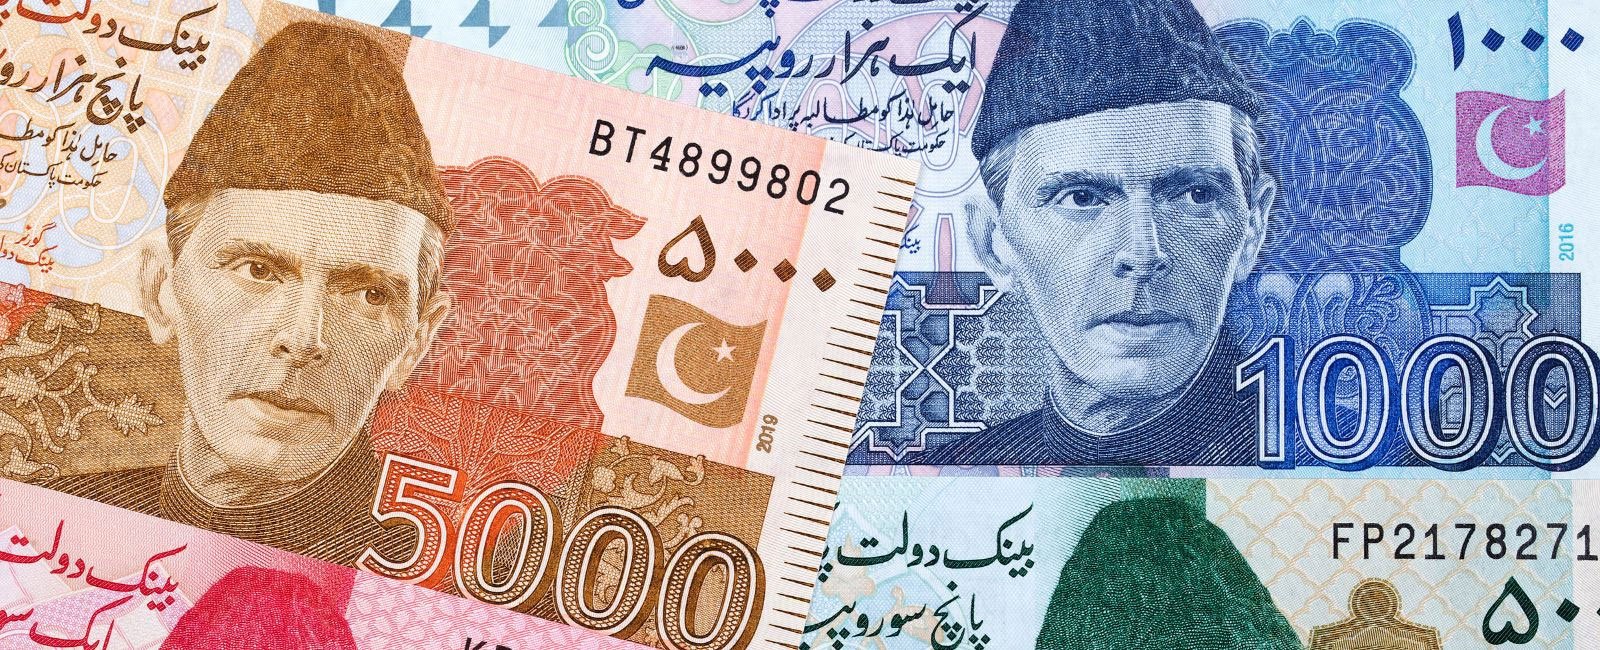 Pakistani Currency: How much was 1 USD to PKR in 1947 ?